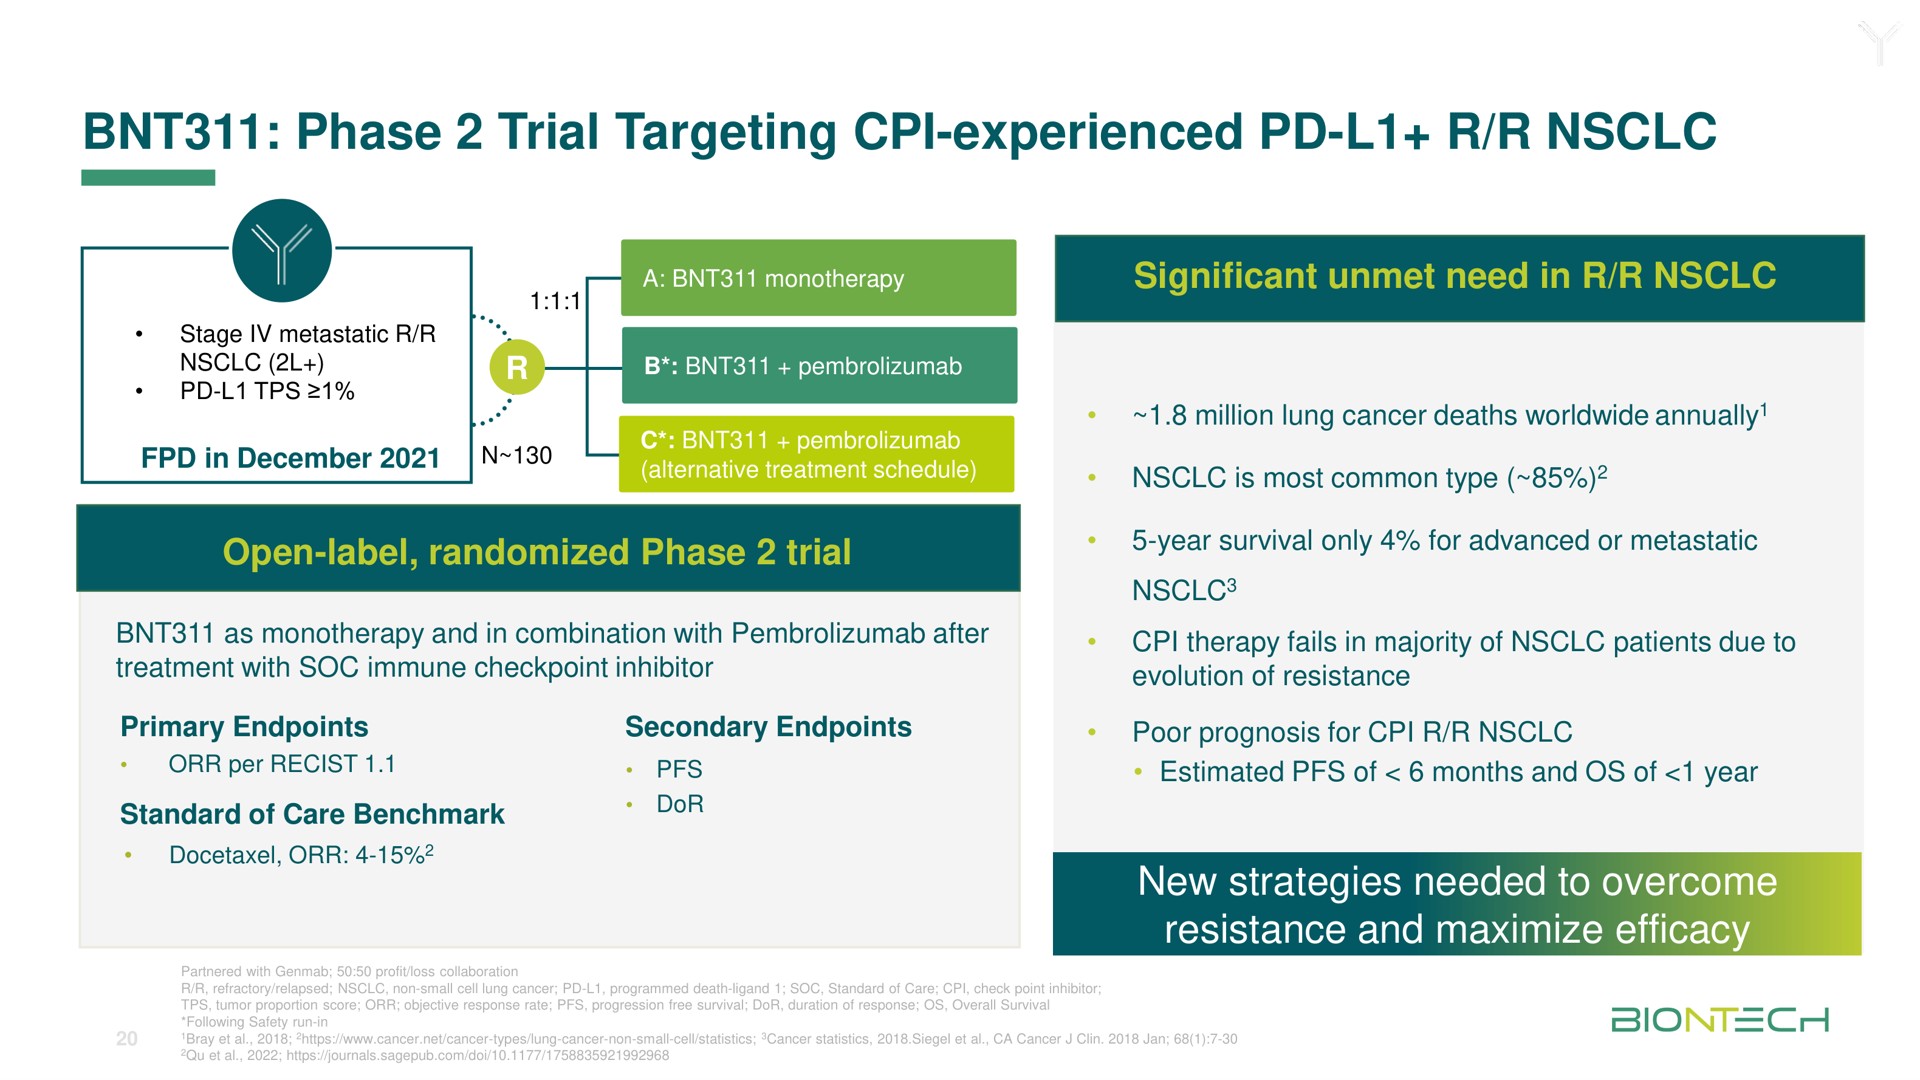 phase trial targeting experienced new strategies needed to overcome resistance and maximize efficacy experienced | BioNTech